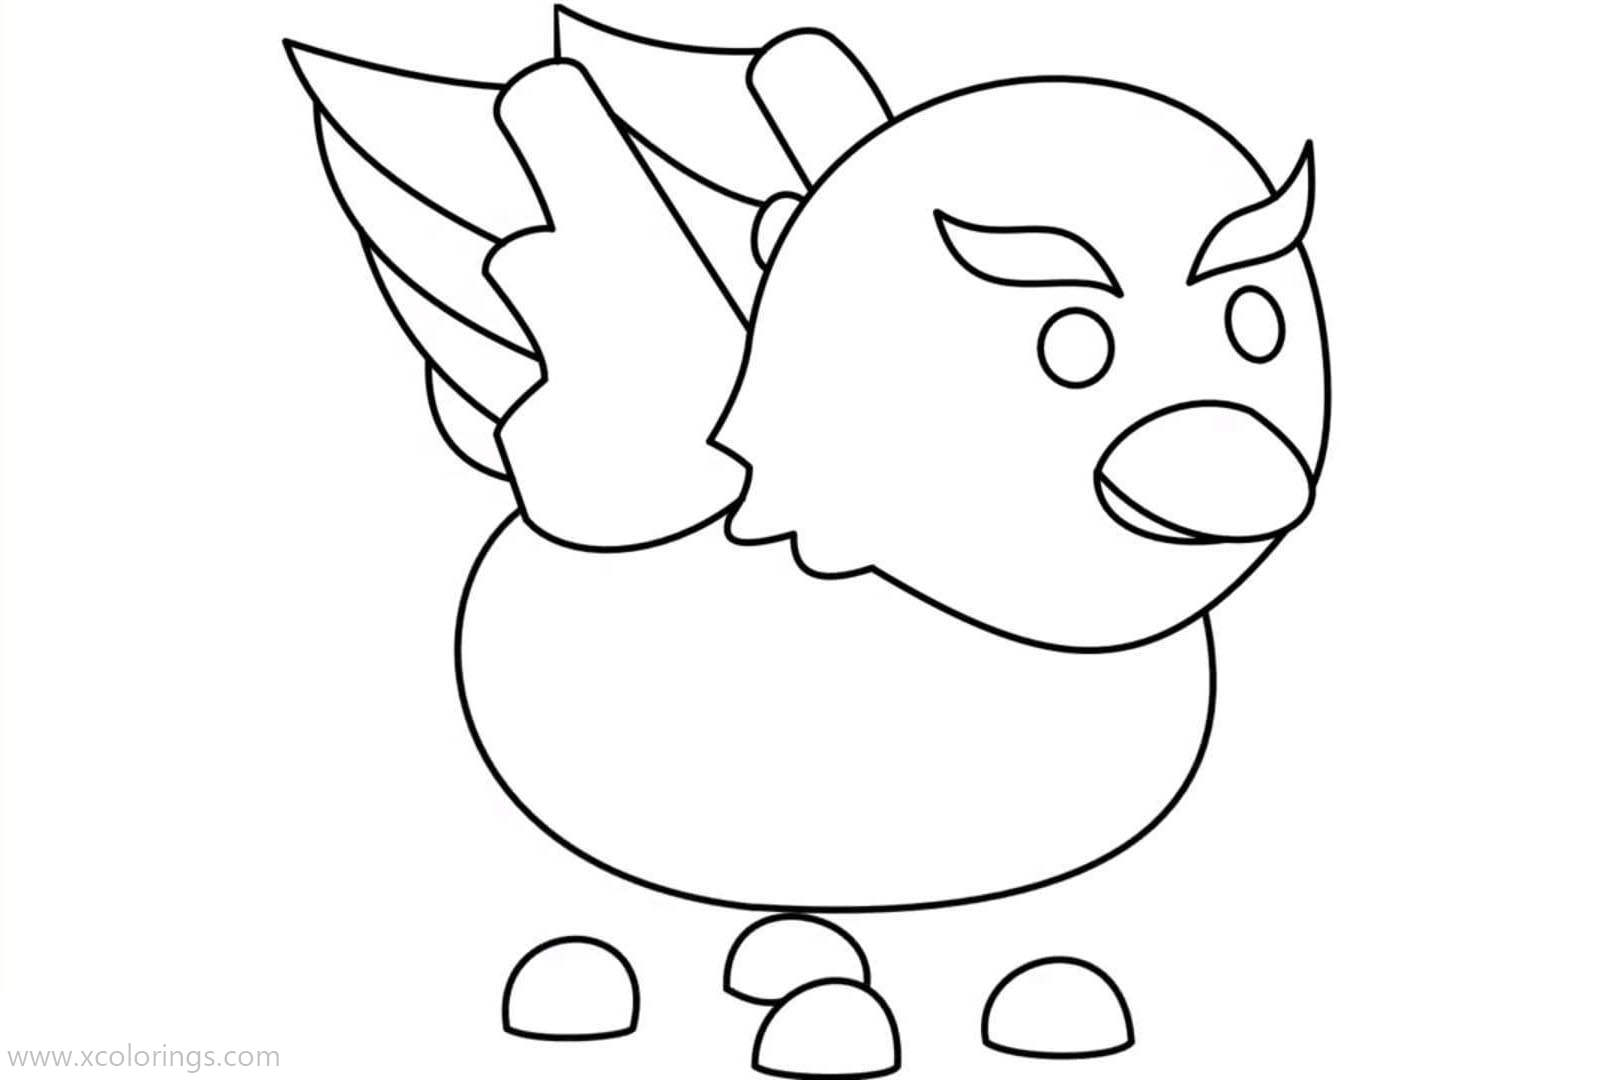 Roblox Adopt Me Coloring Pages Griffin - XColorings.com